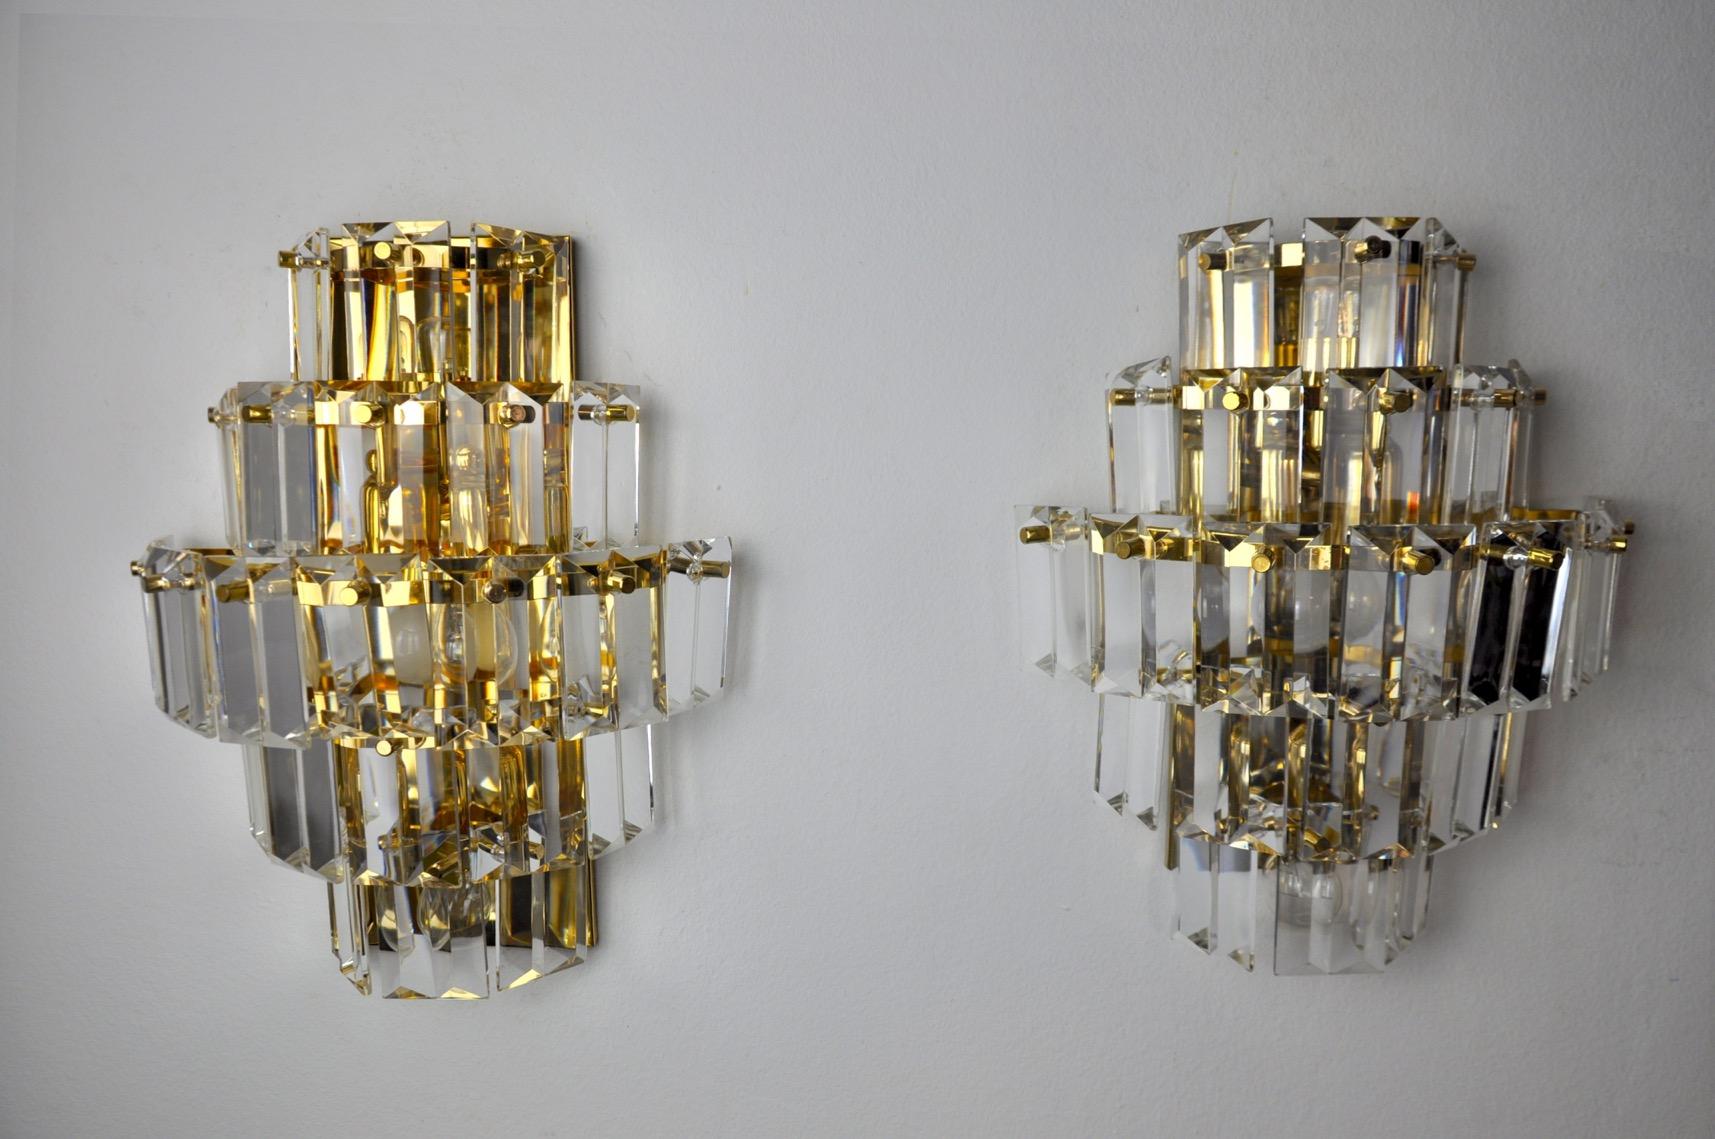 Very nice pair of kinkeldey sconces designed and produced in Germany in the 1970s. Cut crystals spread over four levels of a golden metal structure. Very beautiful design objects that will illuminate your interior wonderfully. Electricity checked,